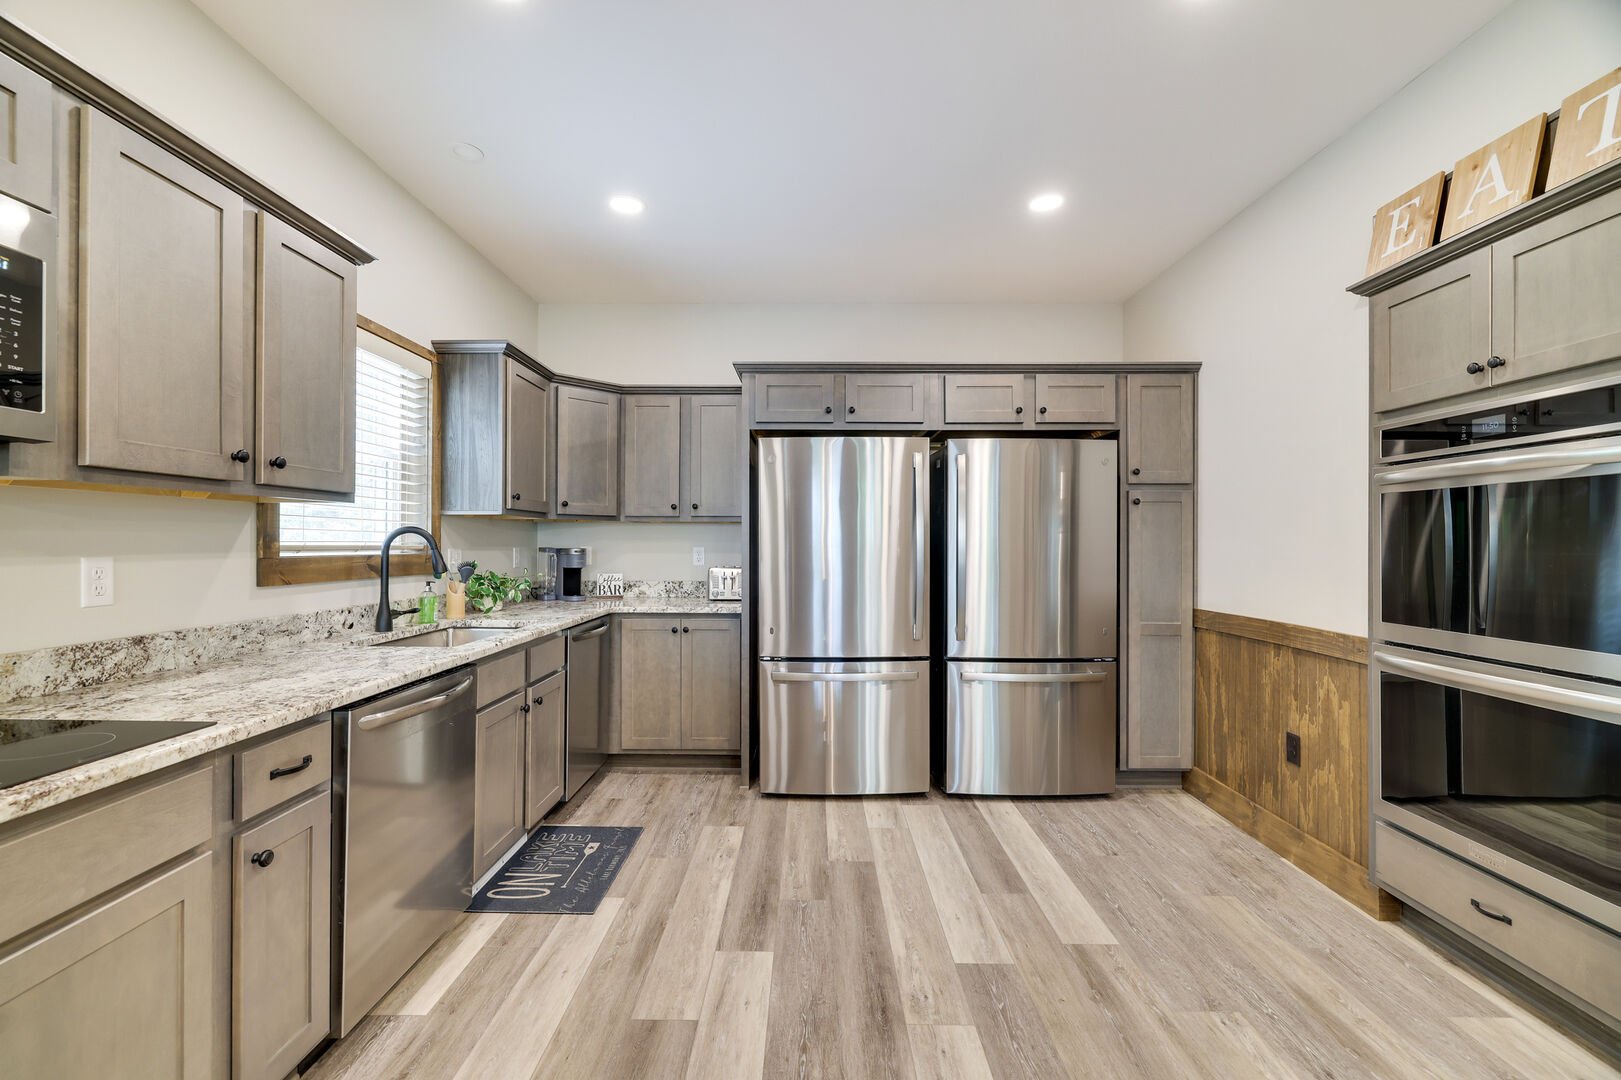 Plenty of Space!
No Bumping Into Each Other in this Spacious Kitchen.